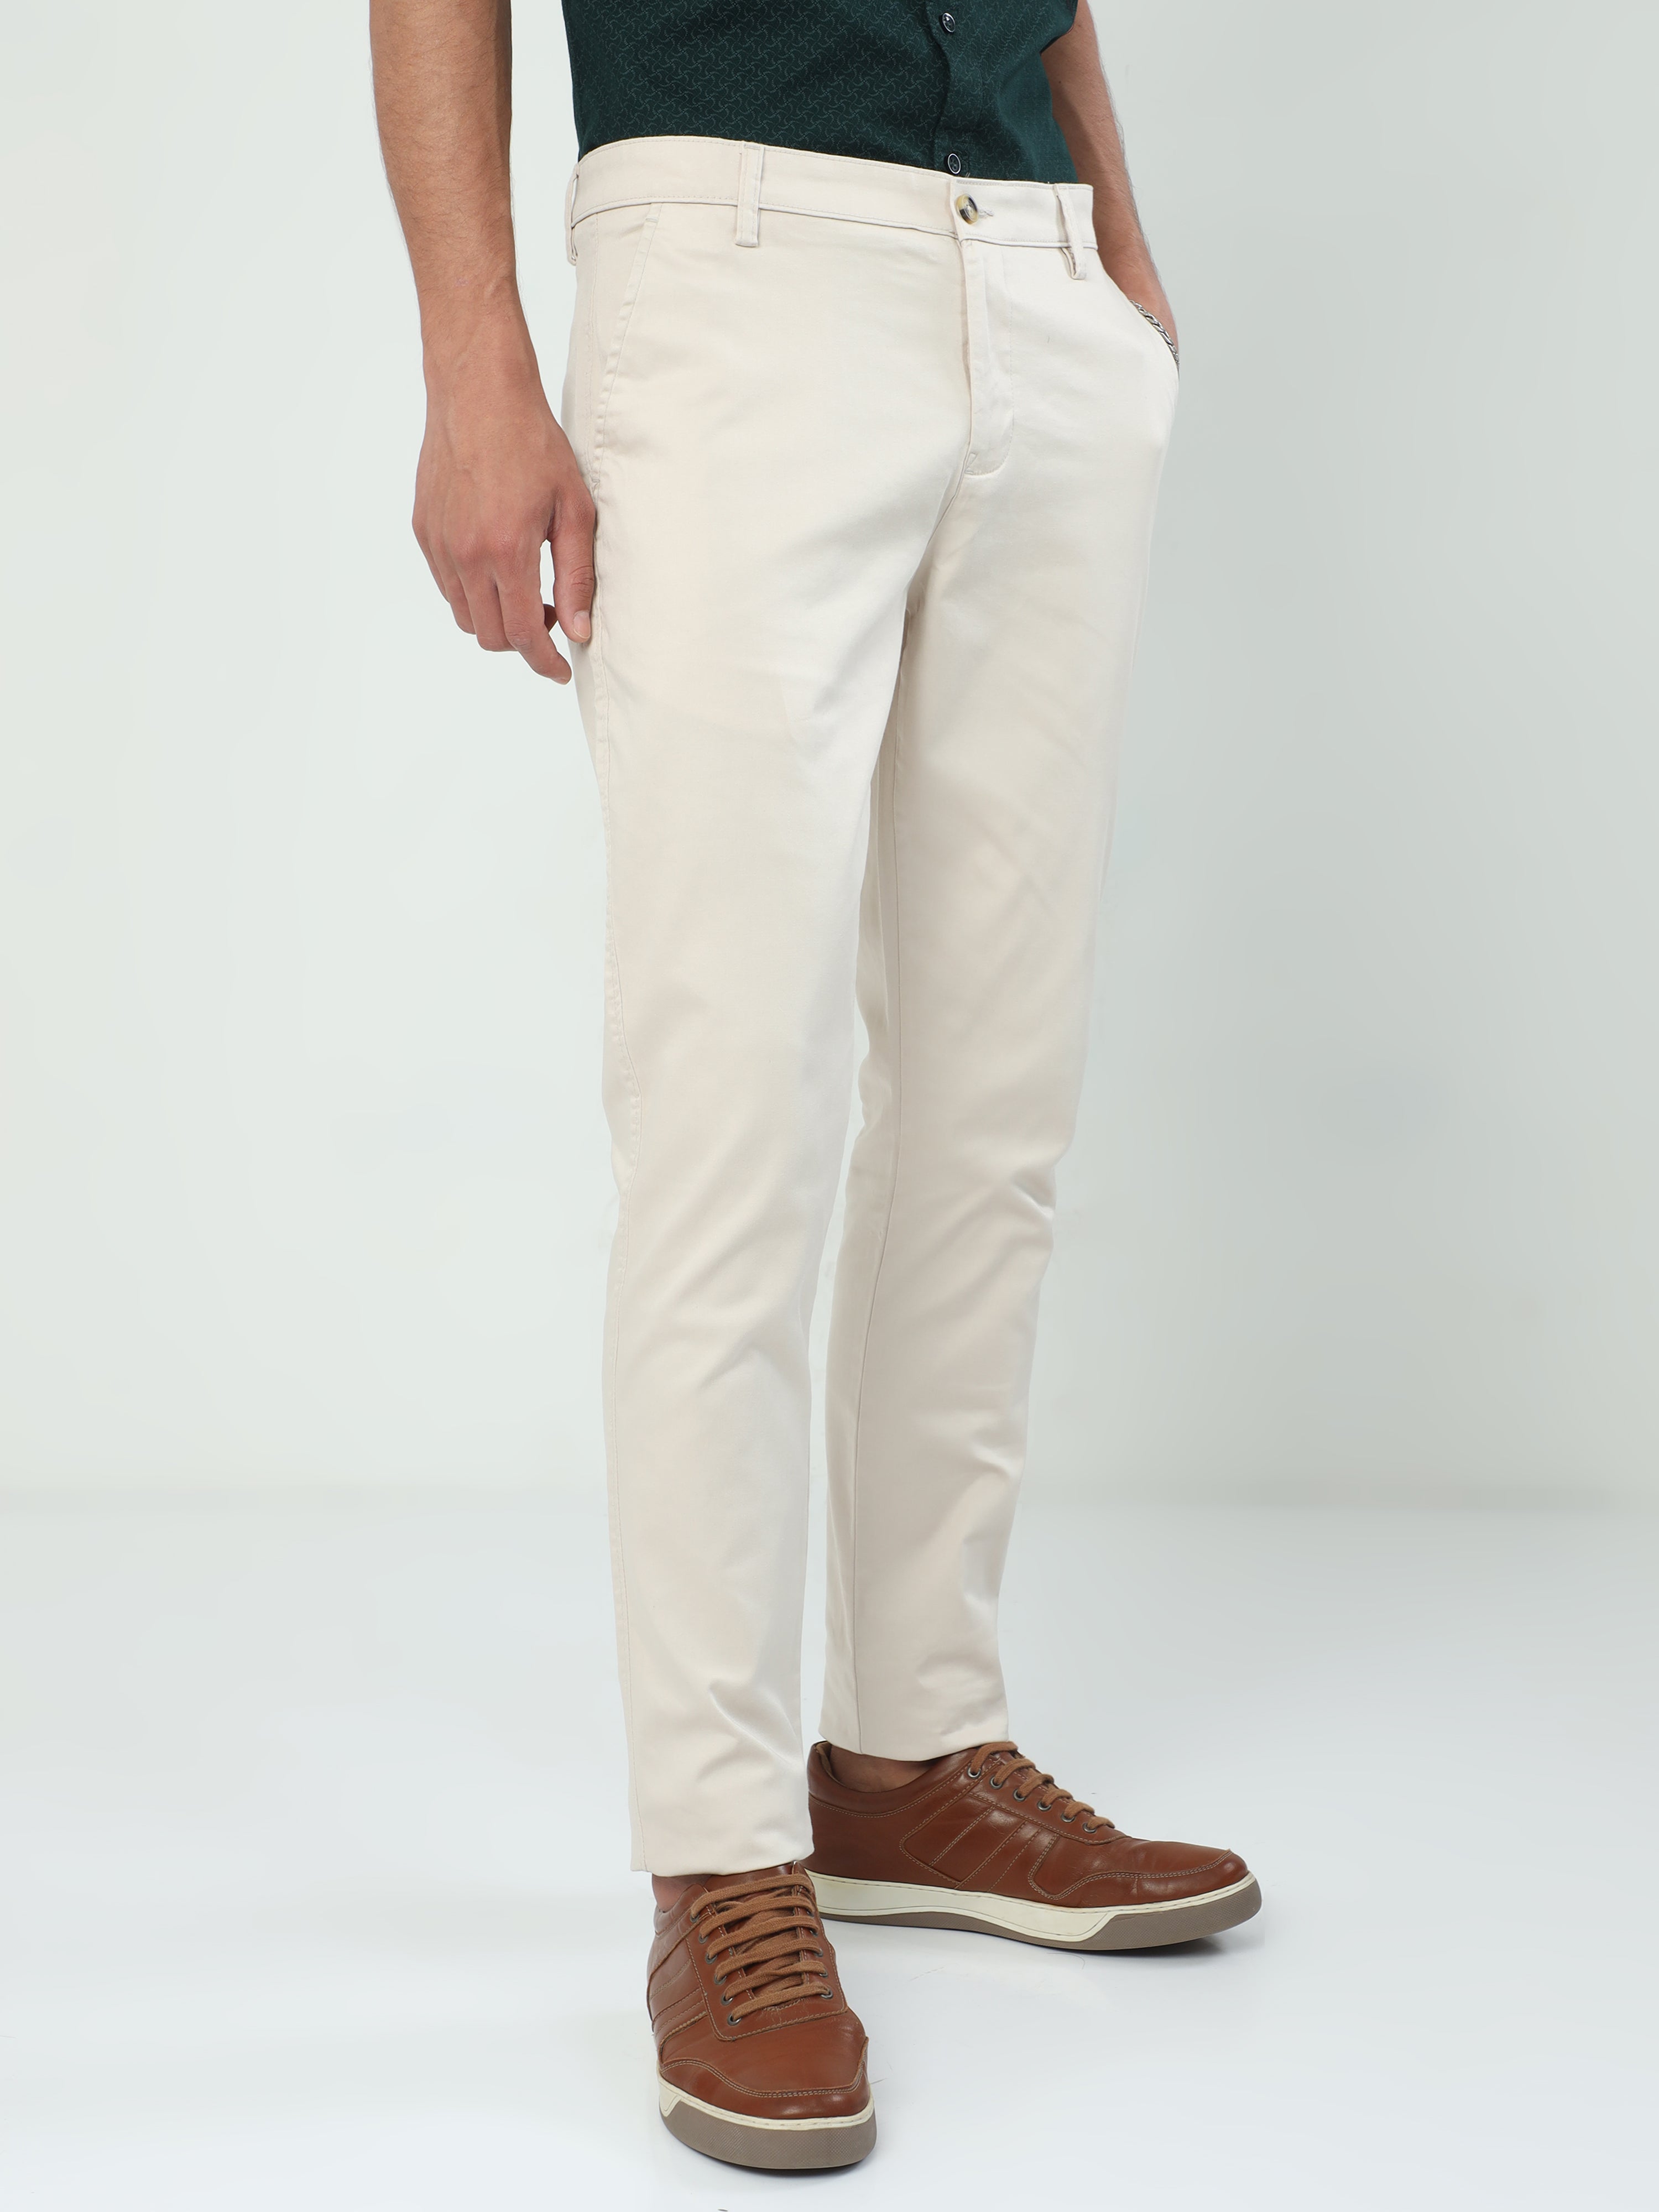 Classic Polo Men's 100% Cotton Moderate Fit Solid Cream Color Trouser |  TO1-37 B-CRM